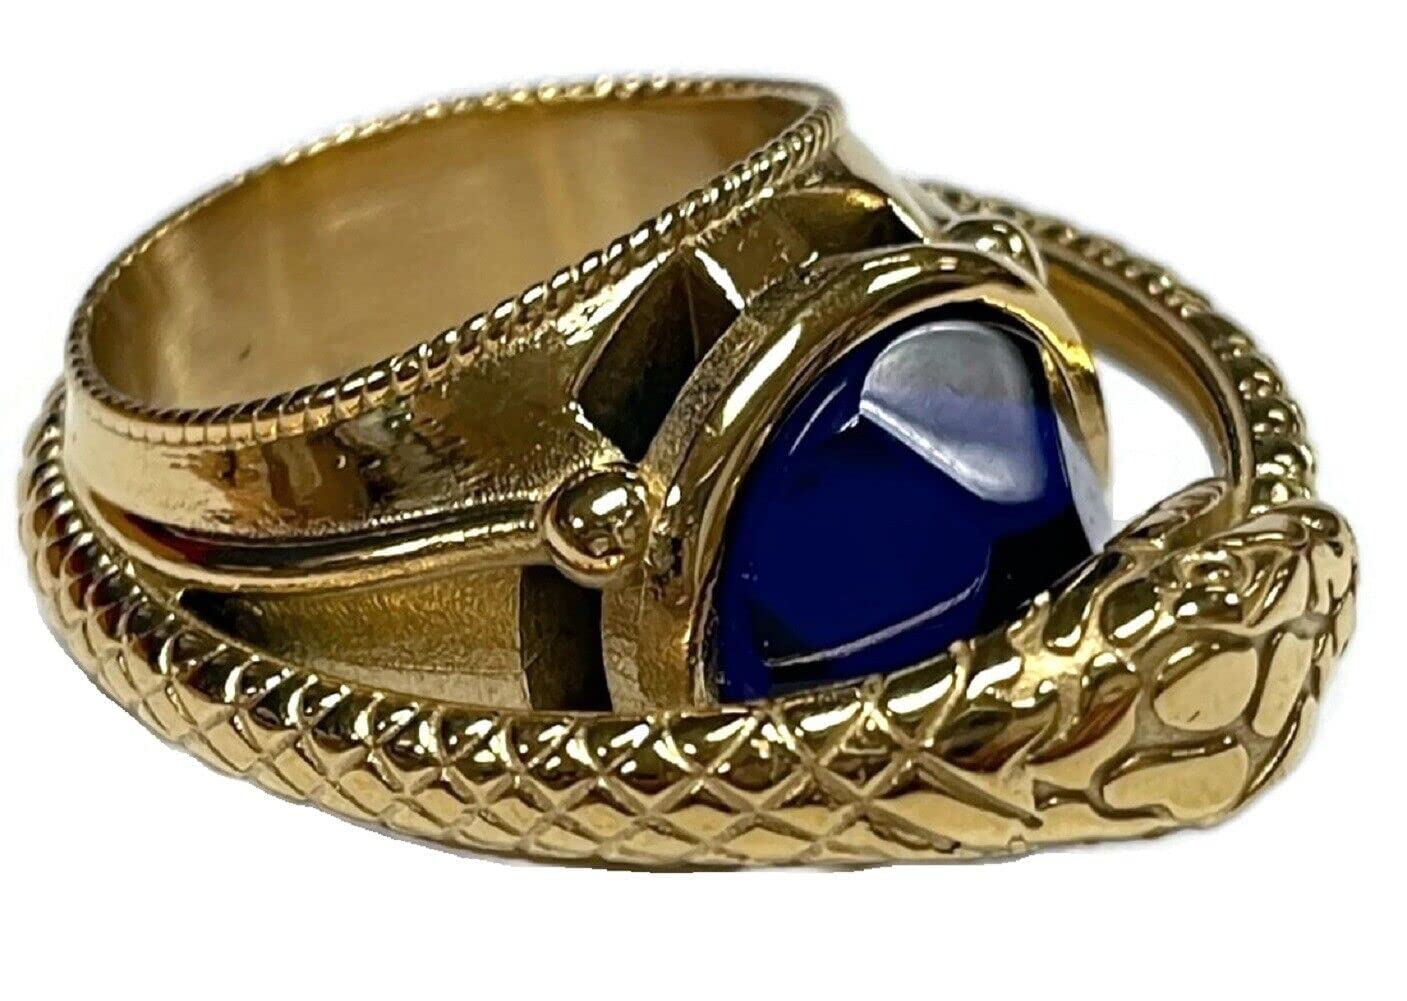 costumebase WHEEL OF TIME Aes Sedai RING channeler ouroboros snake props mage the wizard (US Size 8)